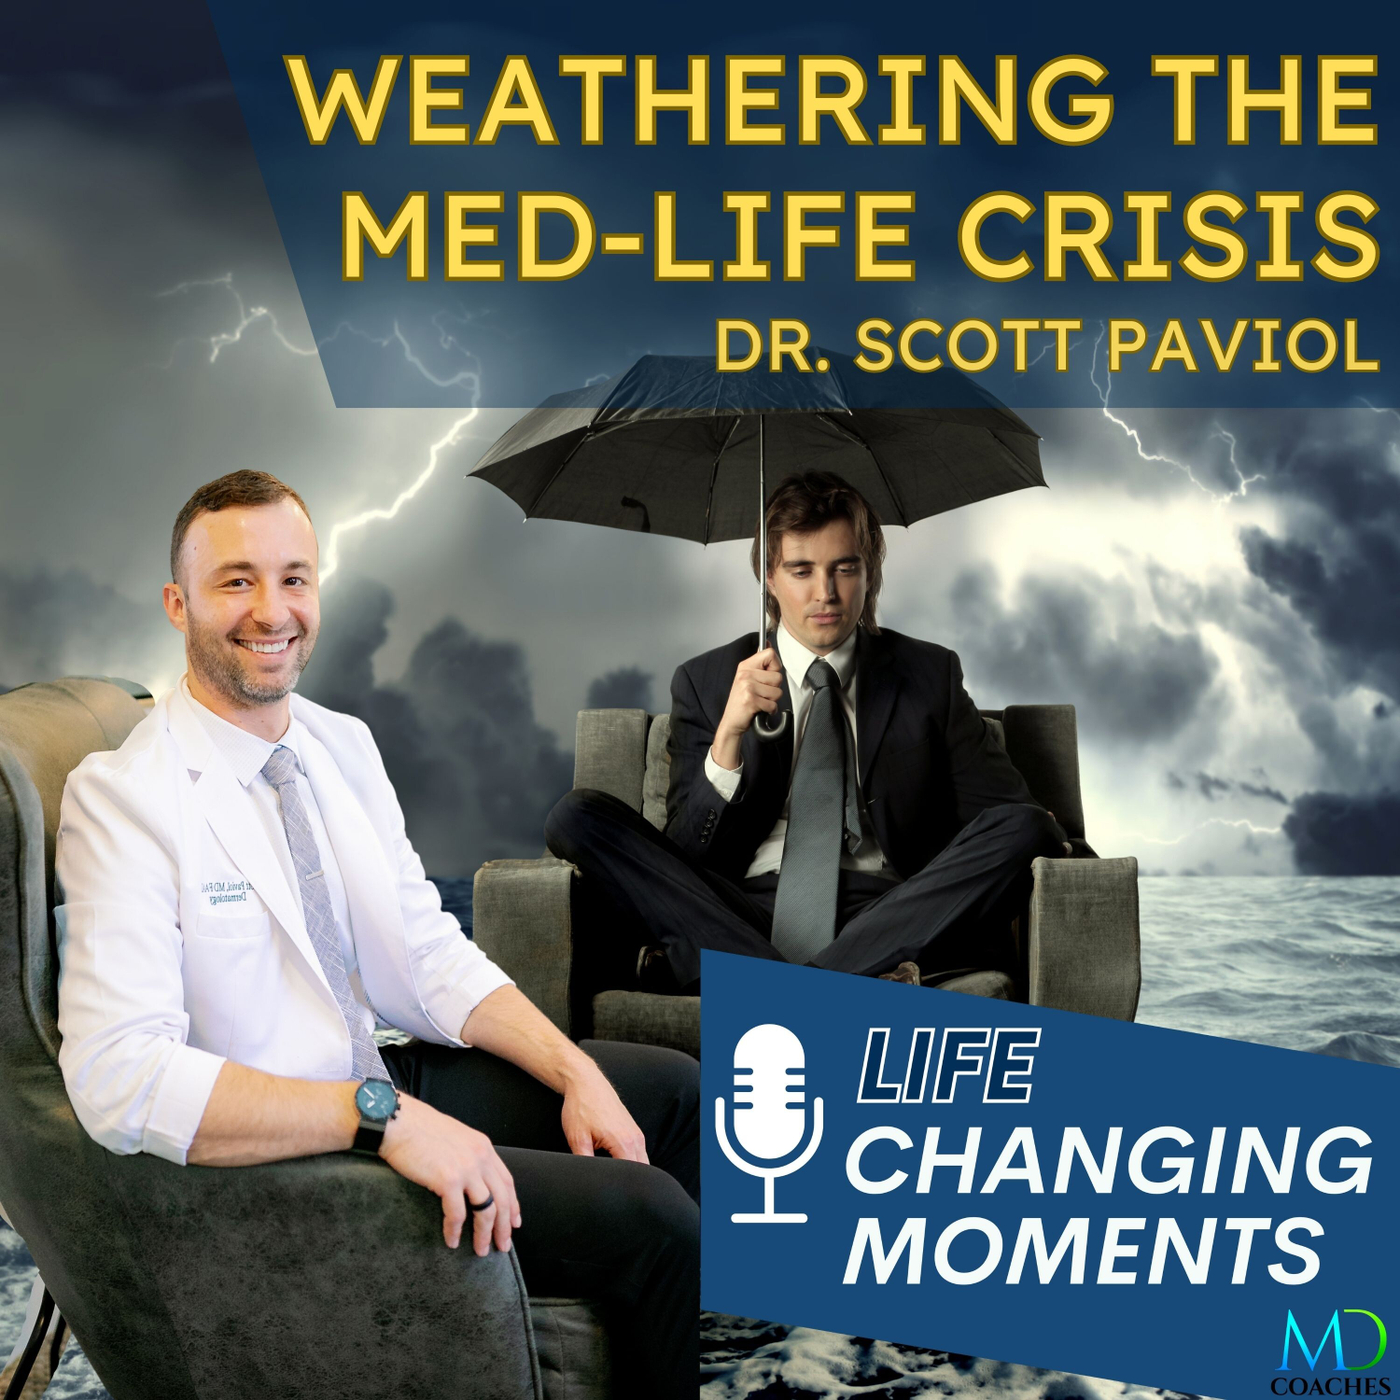 life changing moments 020 weathering the med life crisis dr scott paviol